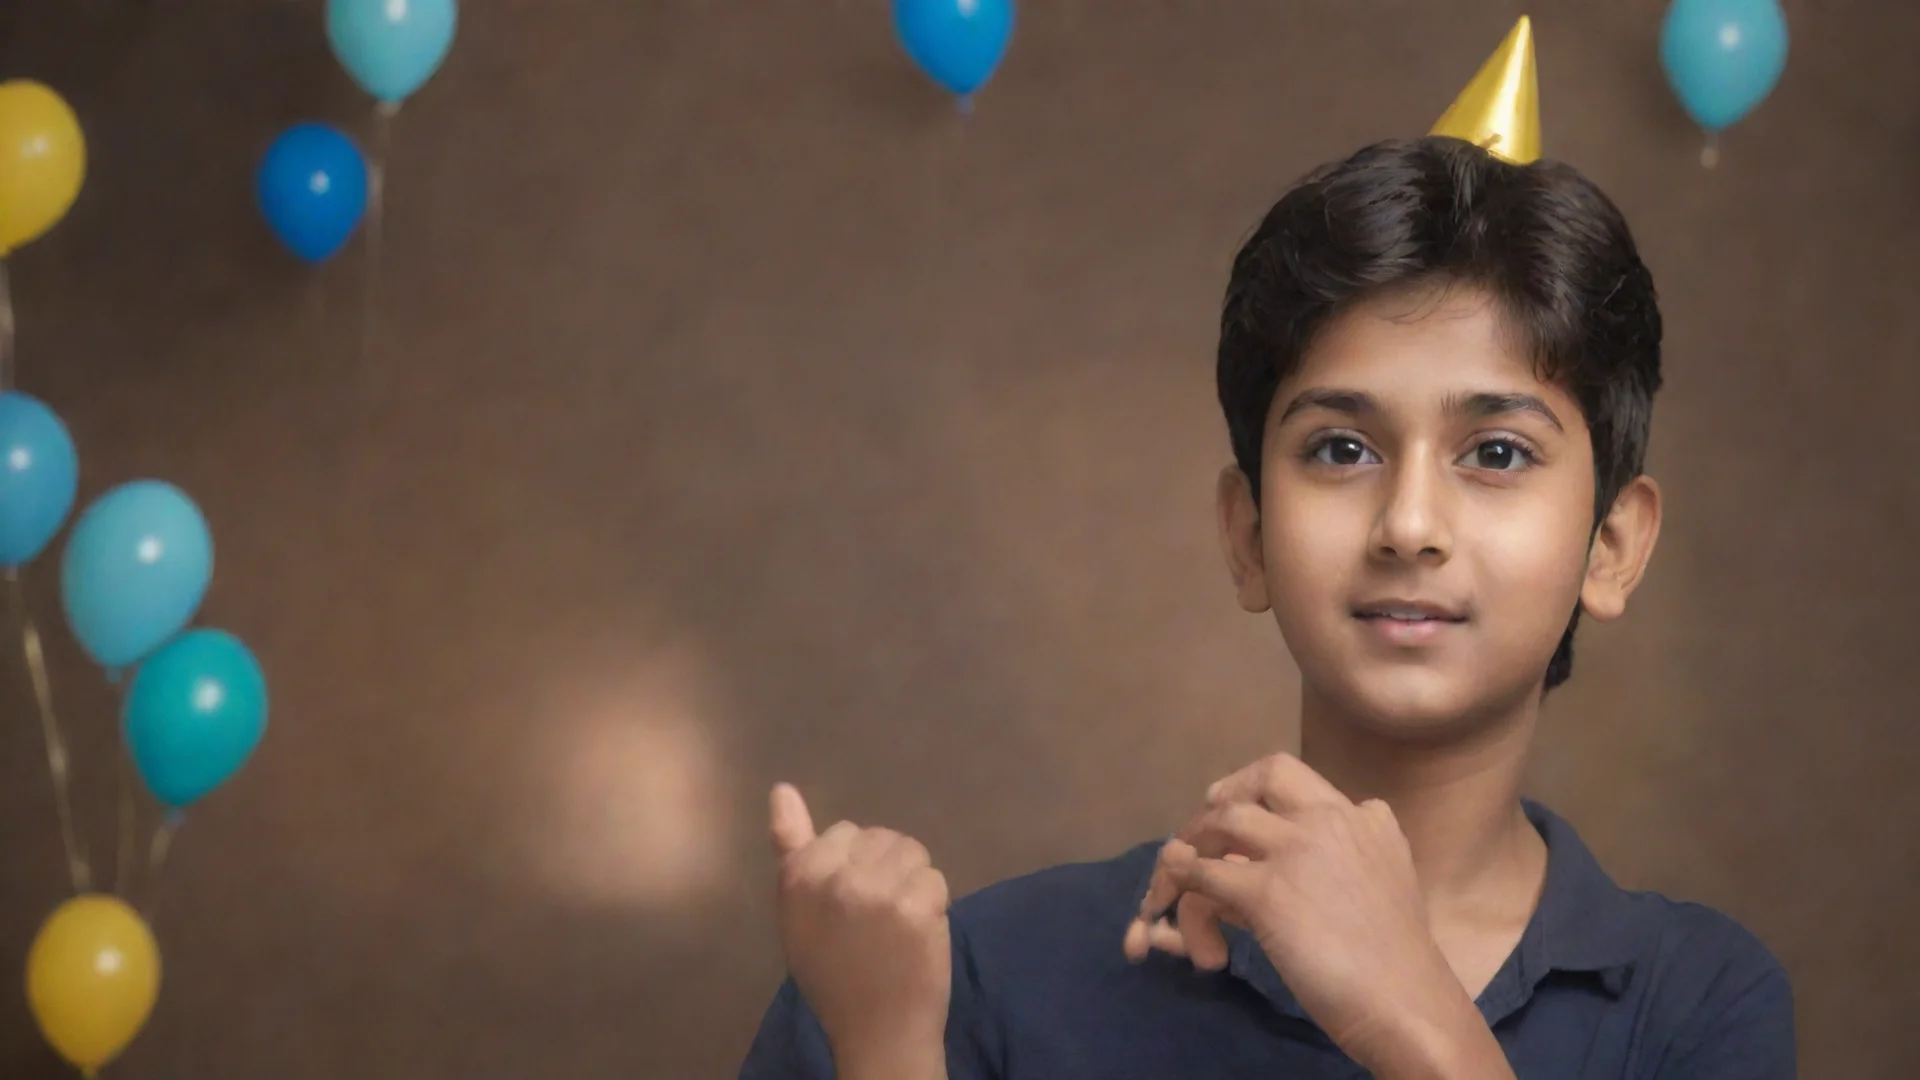 aiamazing a party of a boy name aditya awesome portrait 2 wide